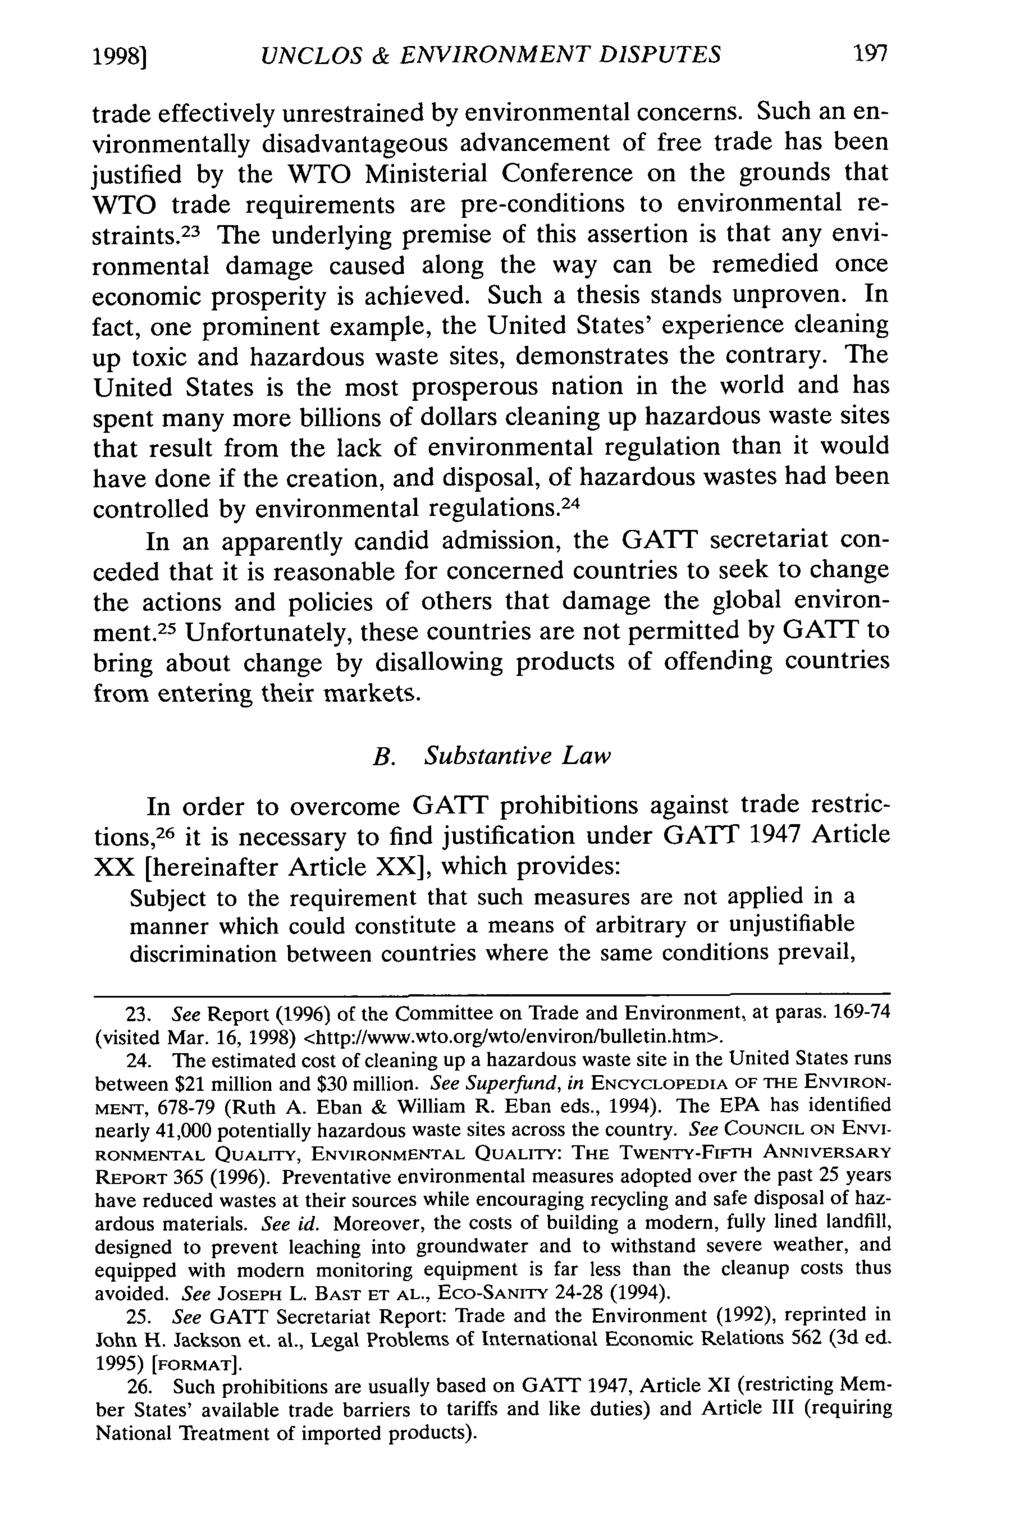 19981 UNCLOS & ENVIRONMENT DISPUTES trade effectively unrestrained by environmental concerns.